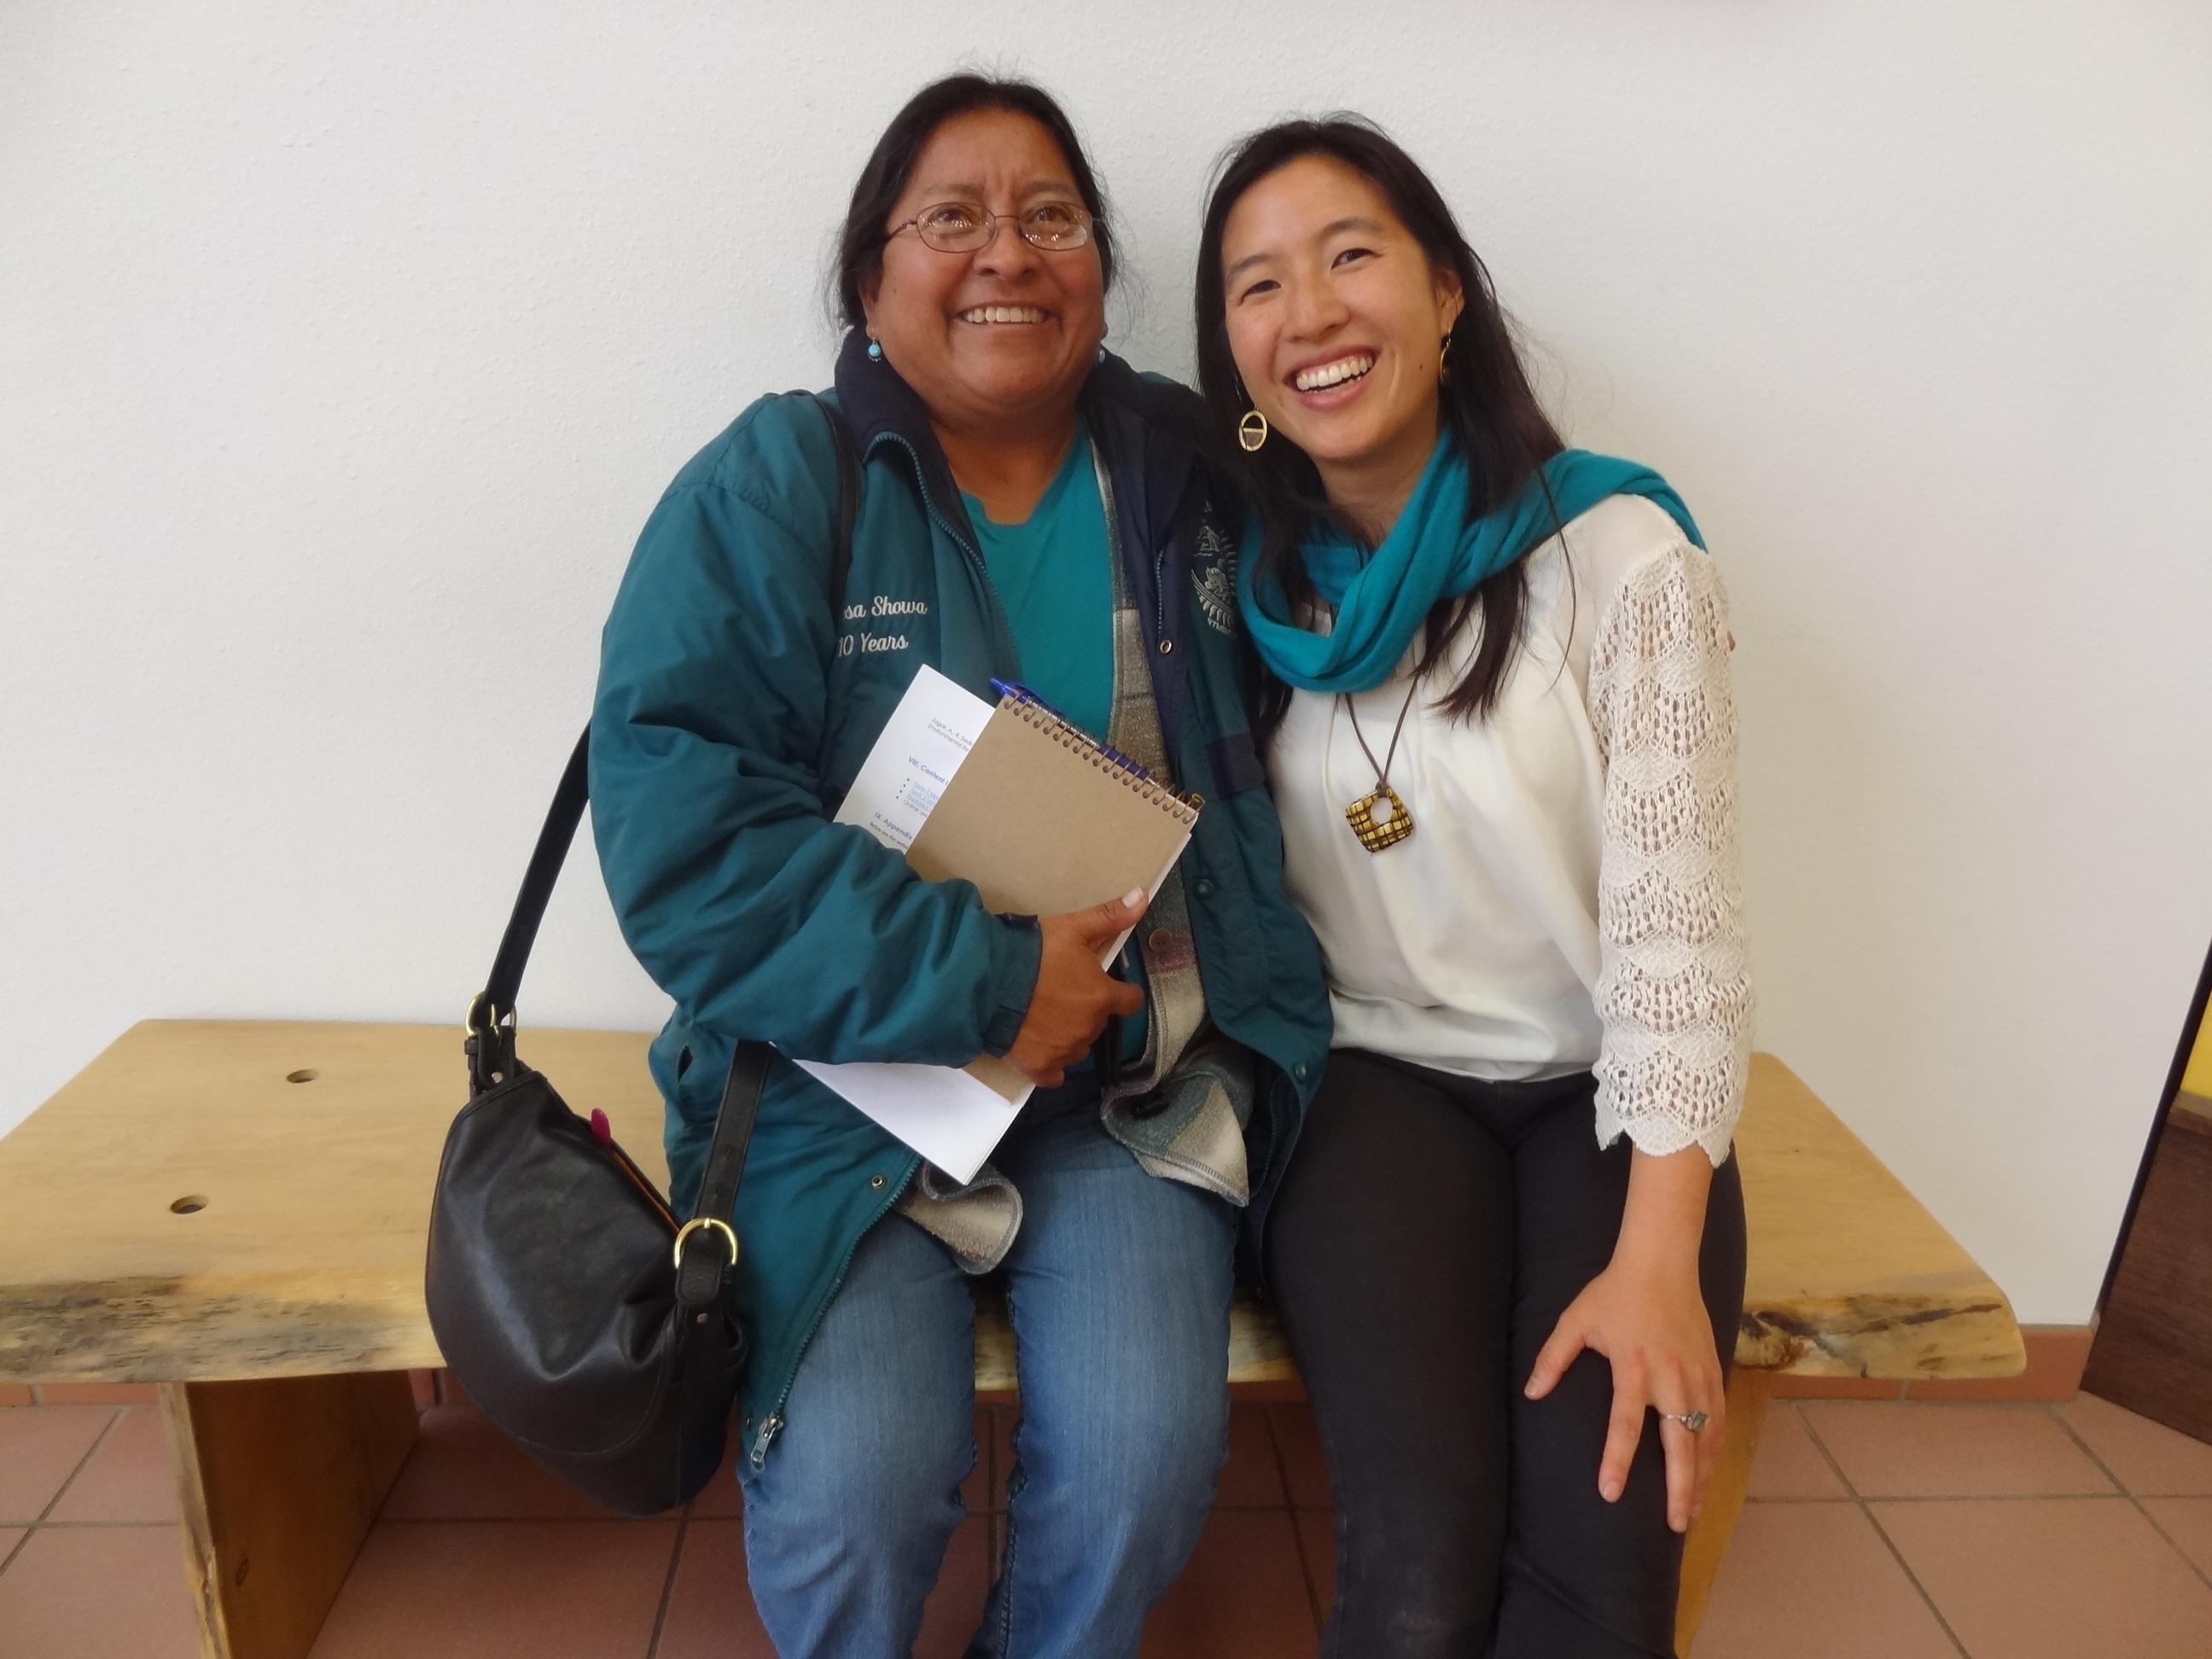 Navajo Nation hydrologist Theresa Showa (left) and NASA DEVELOP scientist Vickie Ly finally meet face to face. Image courtesy of NASA DEVELOP.